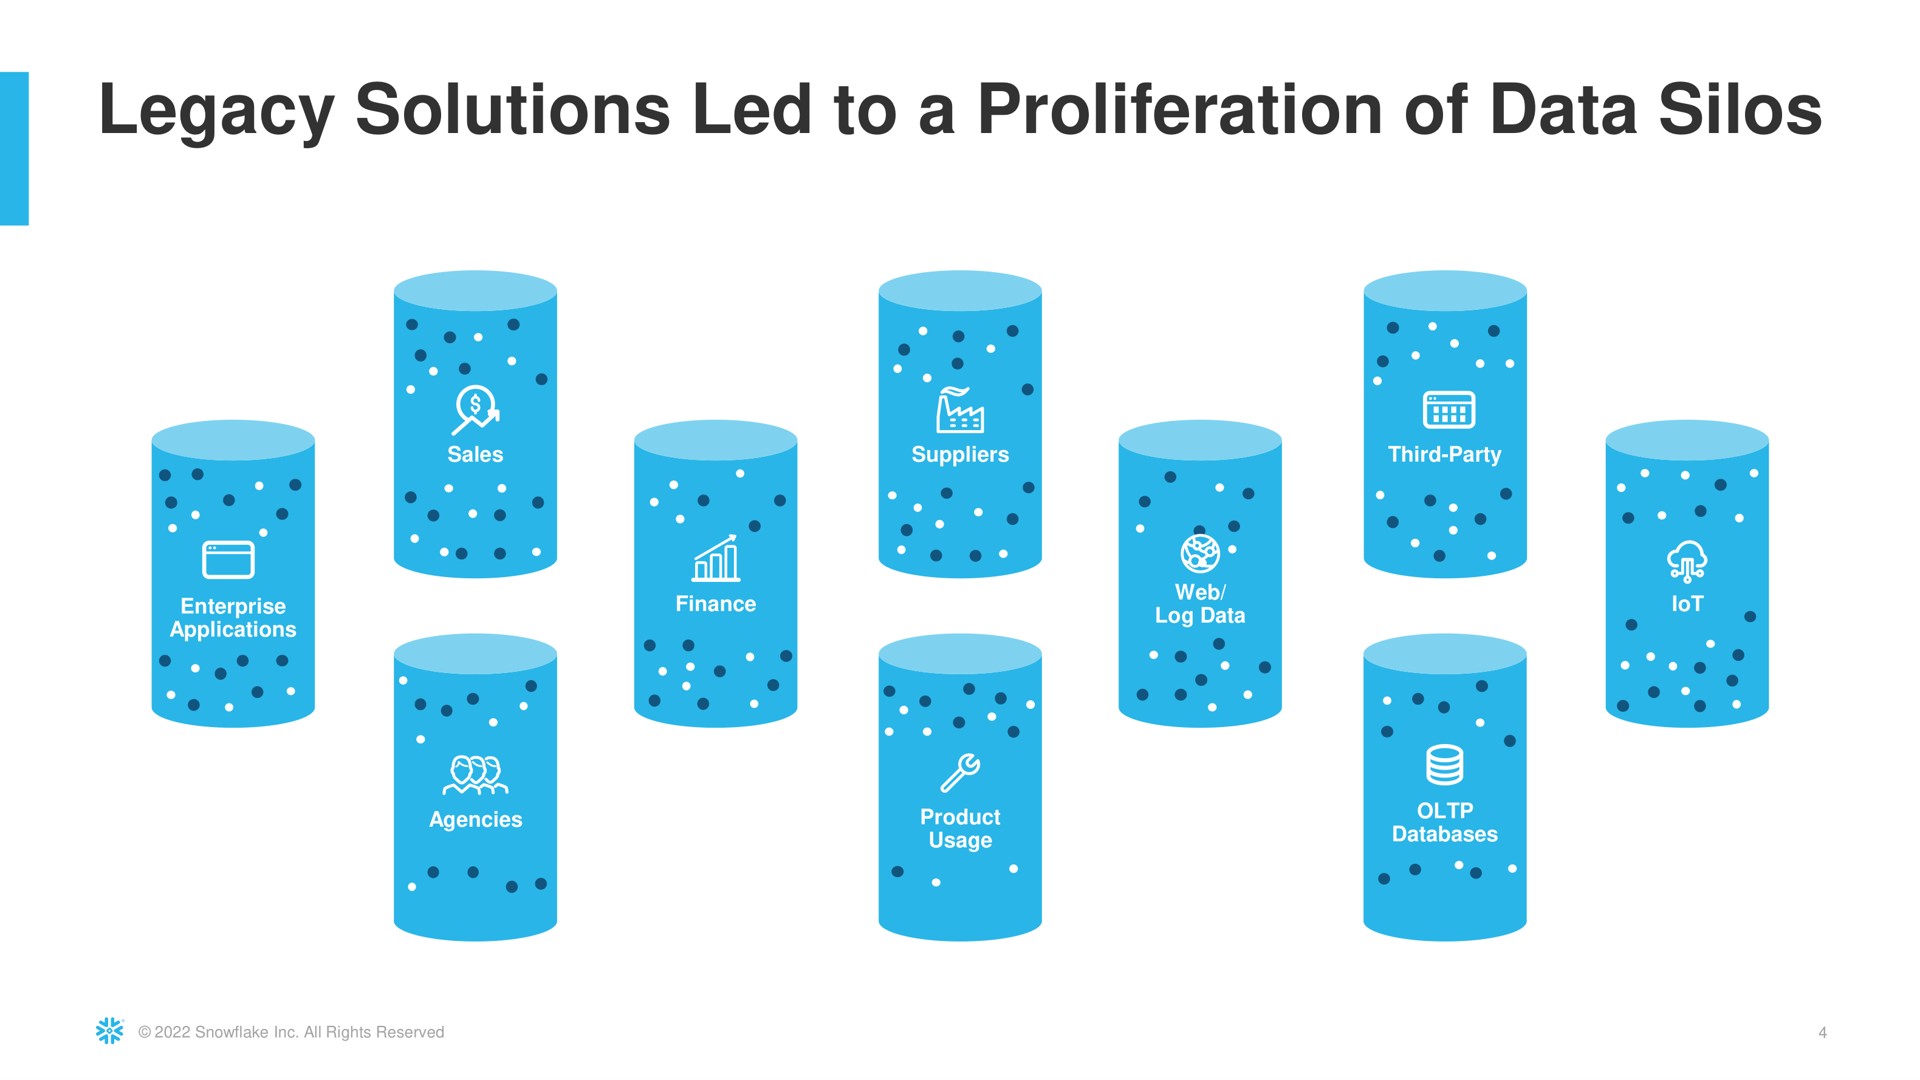 legacy solutions led to a proliferation of data silos | Snowflake